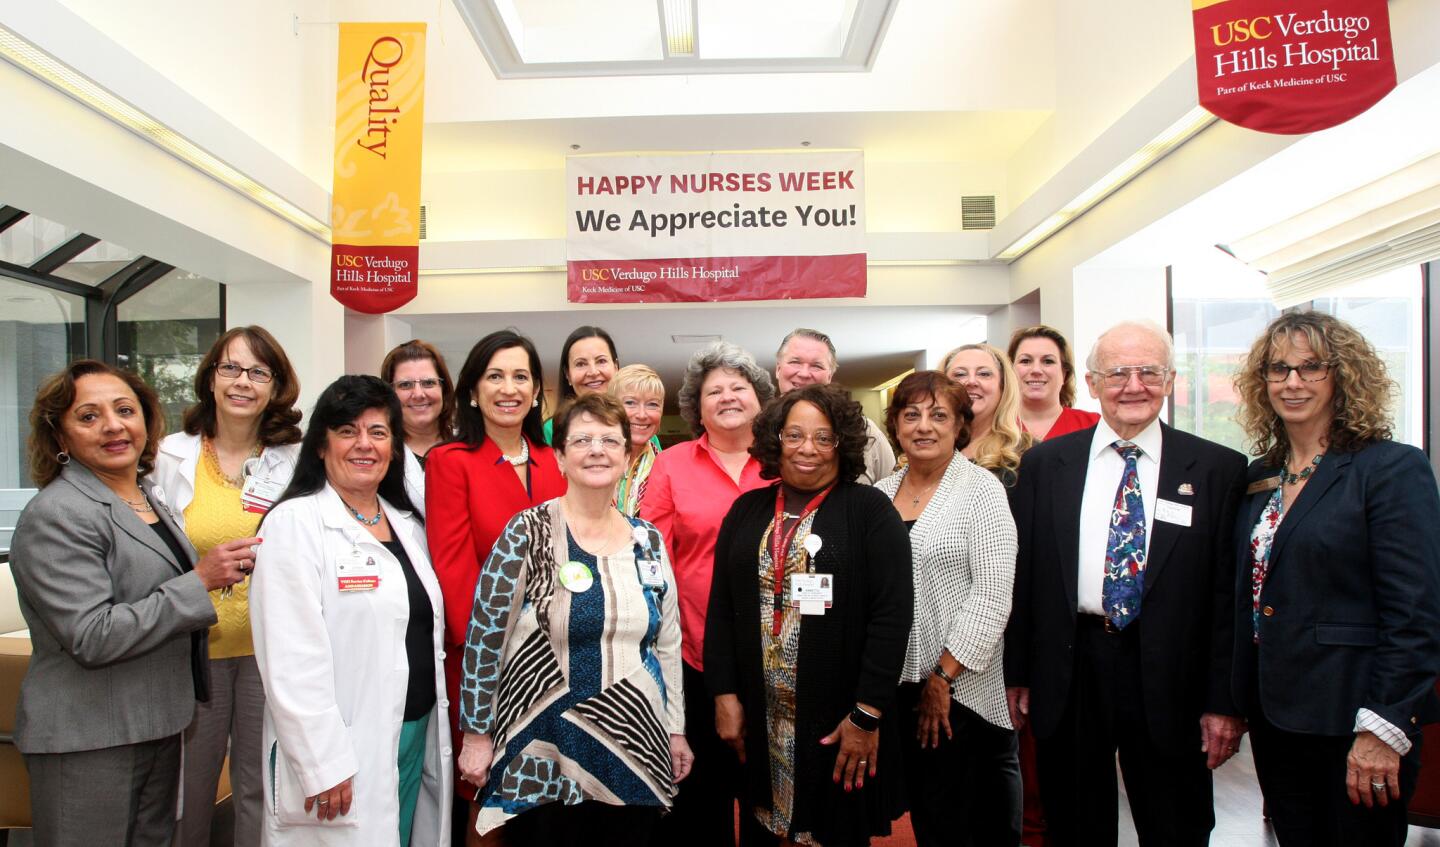 Photo Gallery: Porto's Bakery Betty Porto helps kick off Nurses Week with free lunch for nurses at USC Verdugo Hills Medical Center in Glendale